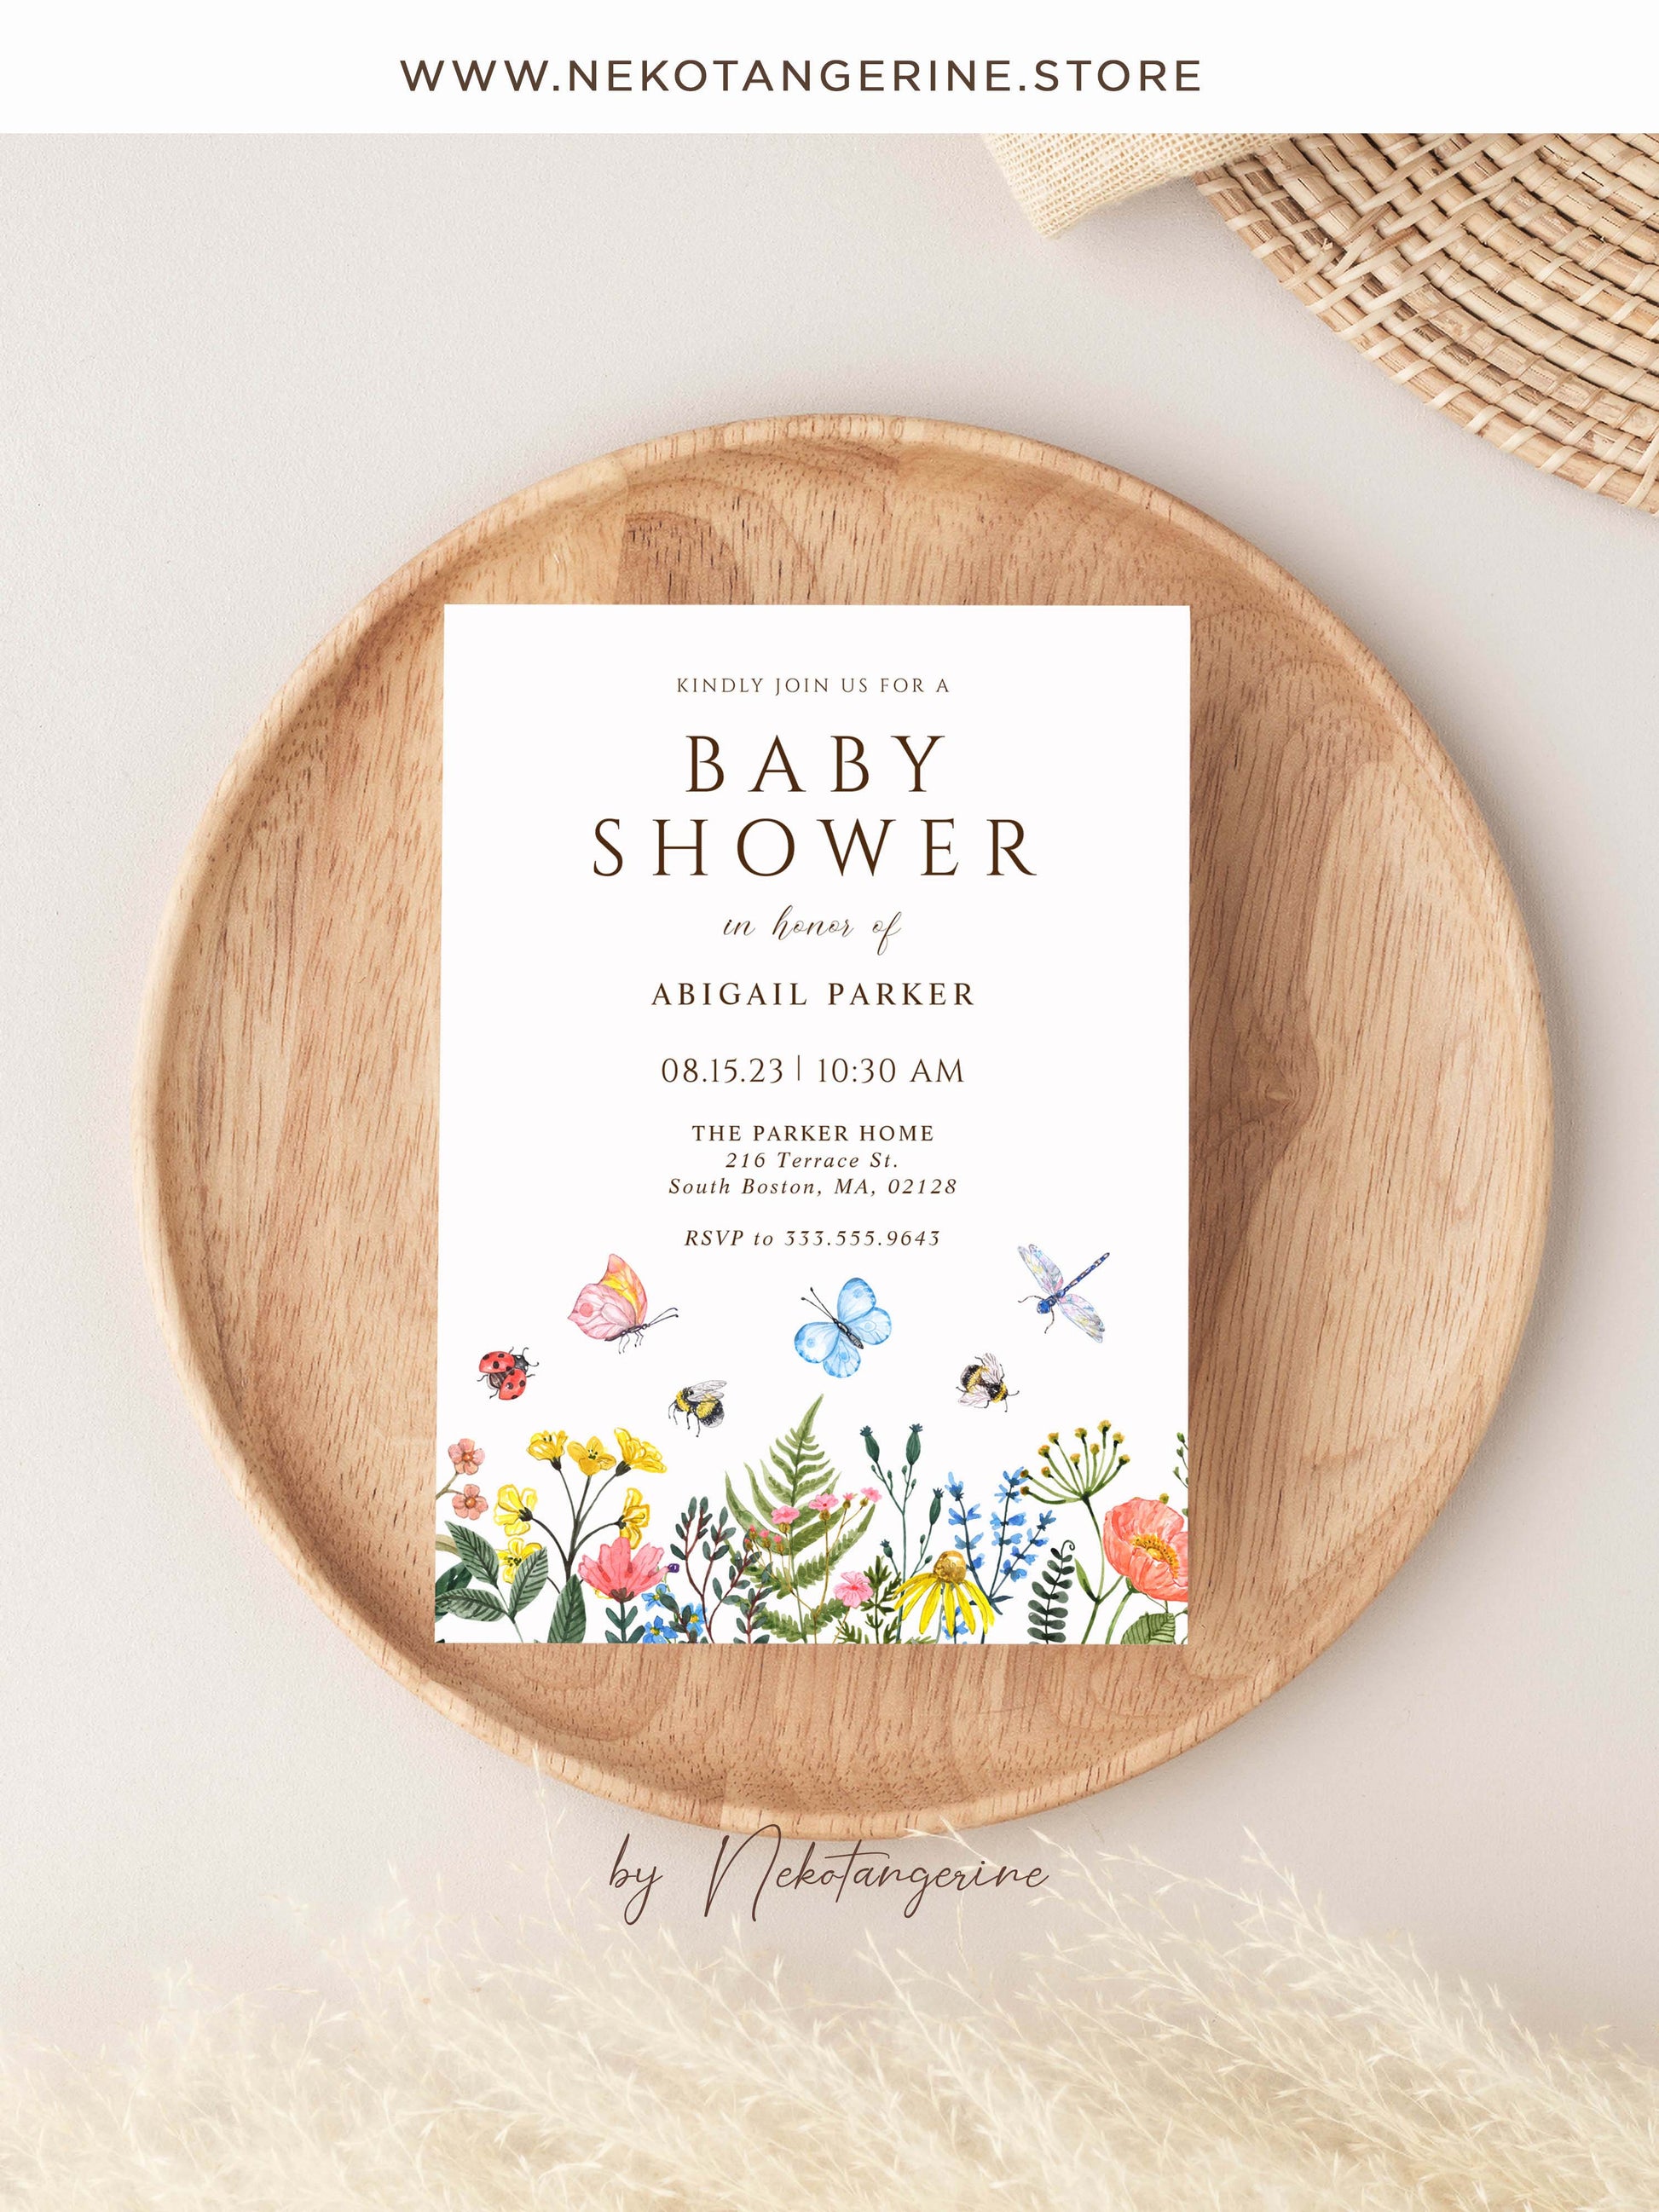 Watercolor wildflower baby shower invite, made of floral frame clipart by Nekotangerine